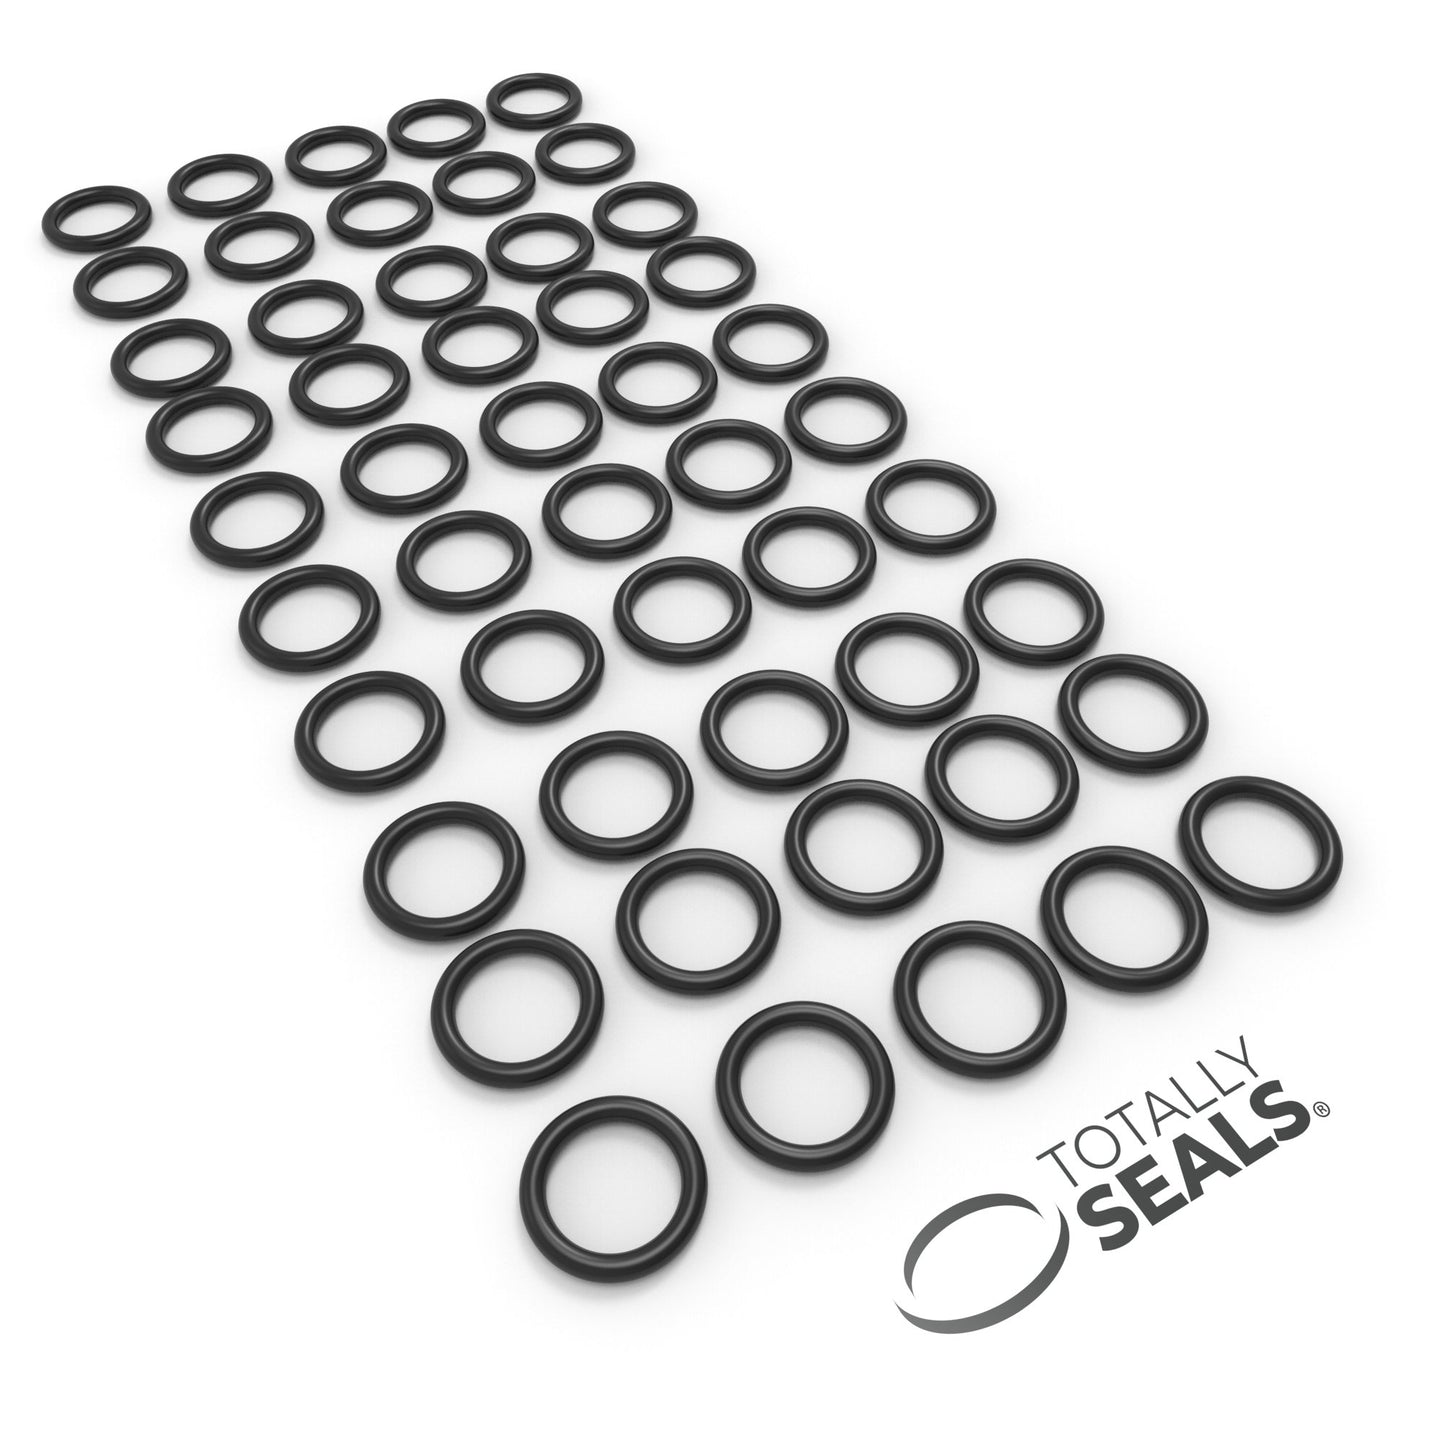 27mm x 3mm (33mm OD) Nitrile O-Rings - Totally Seals®